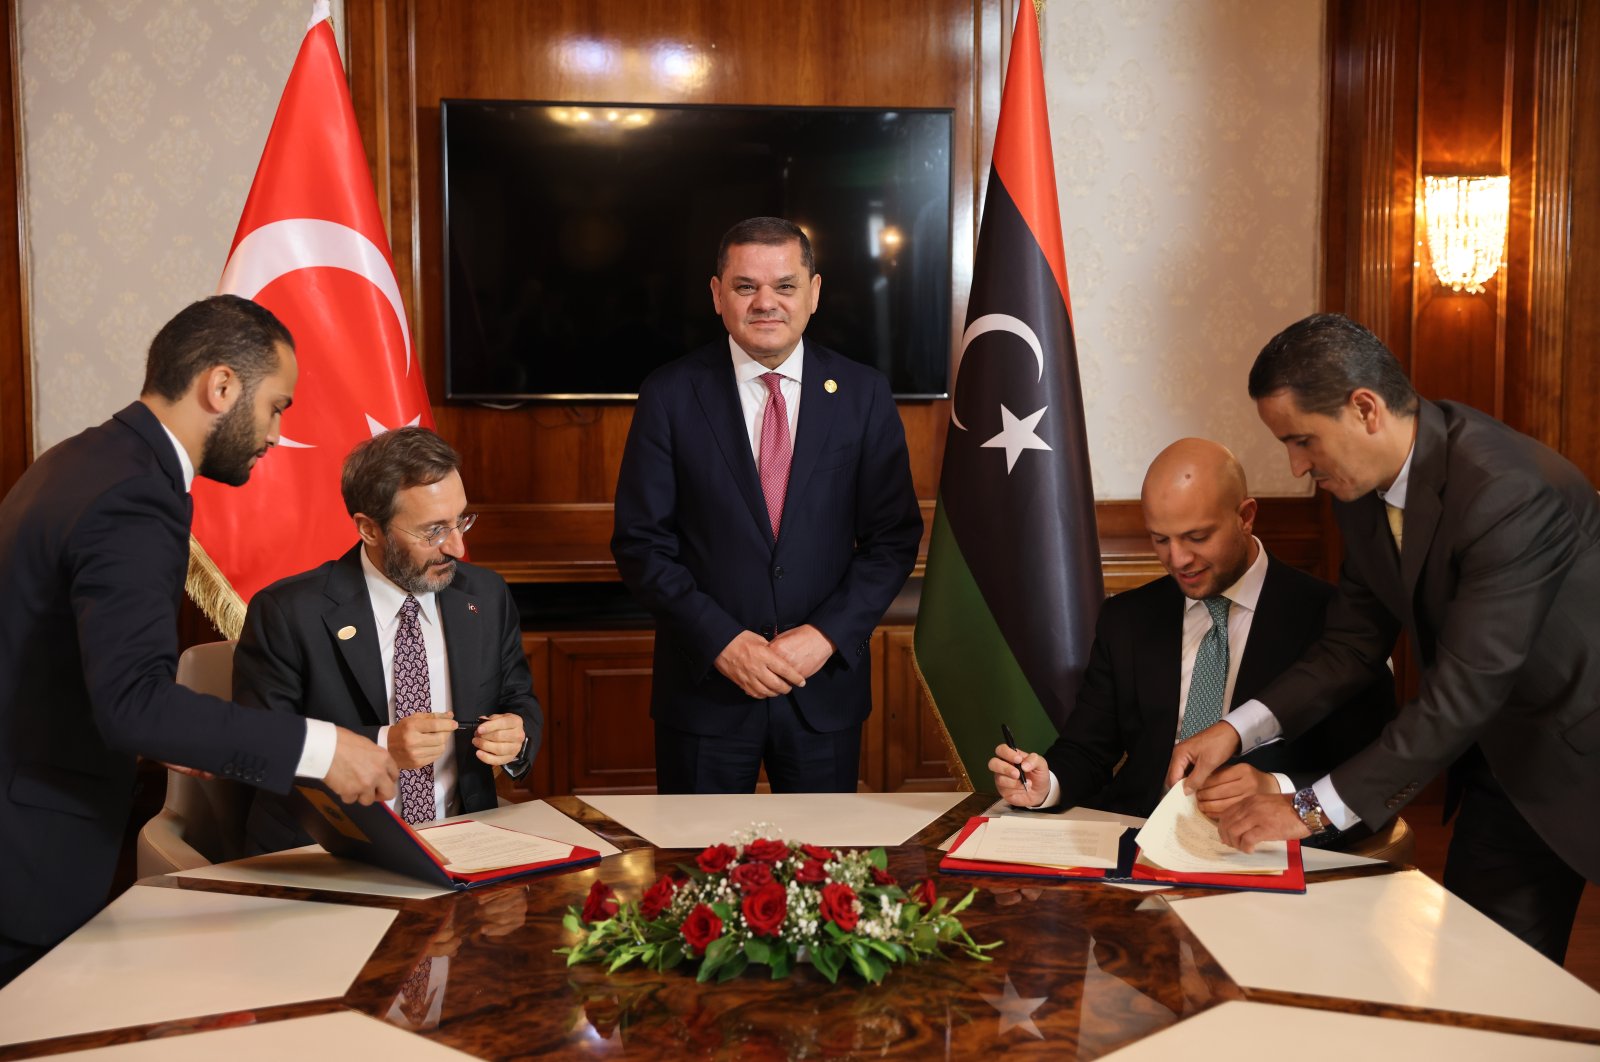 Türkiye&#039;s communications chief Fahrettin Altun (2nd L) and Libyan State Minister for Communication and Political Affairs Walid al-Lafi (2nd R) sign an agreement on media in Tripoli, Libya, Oct. 3, 2022 (AA Photo)